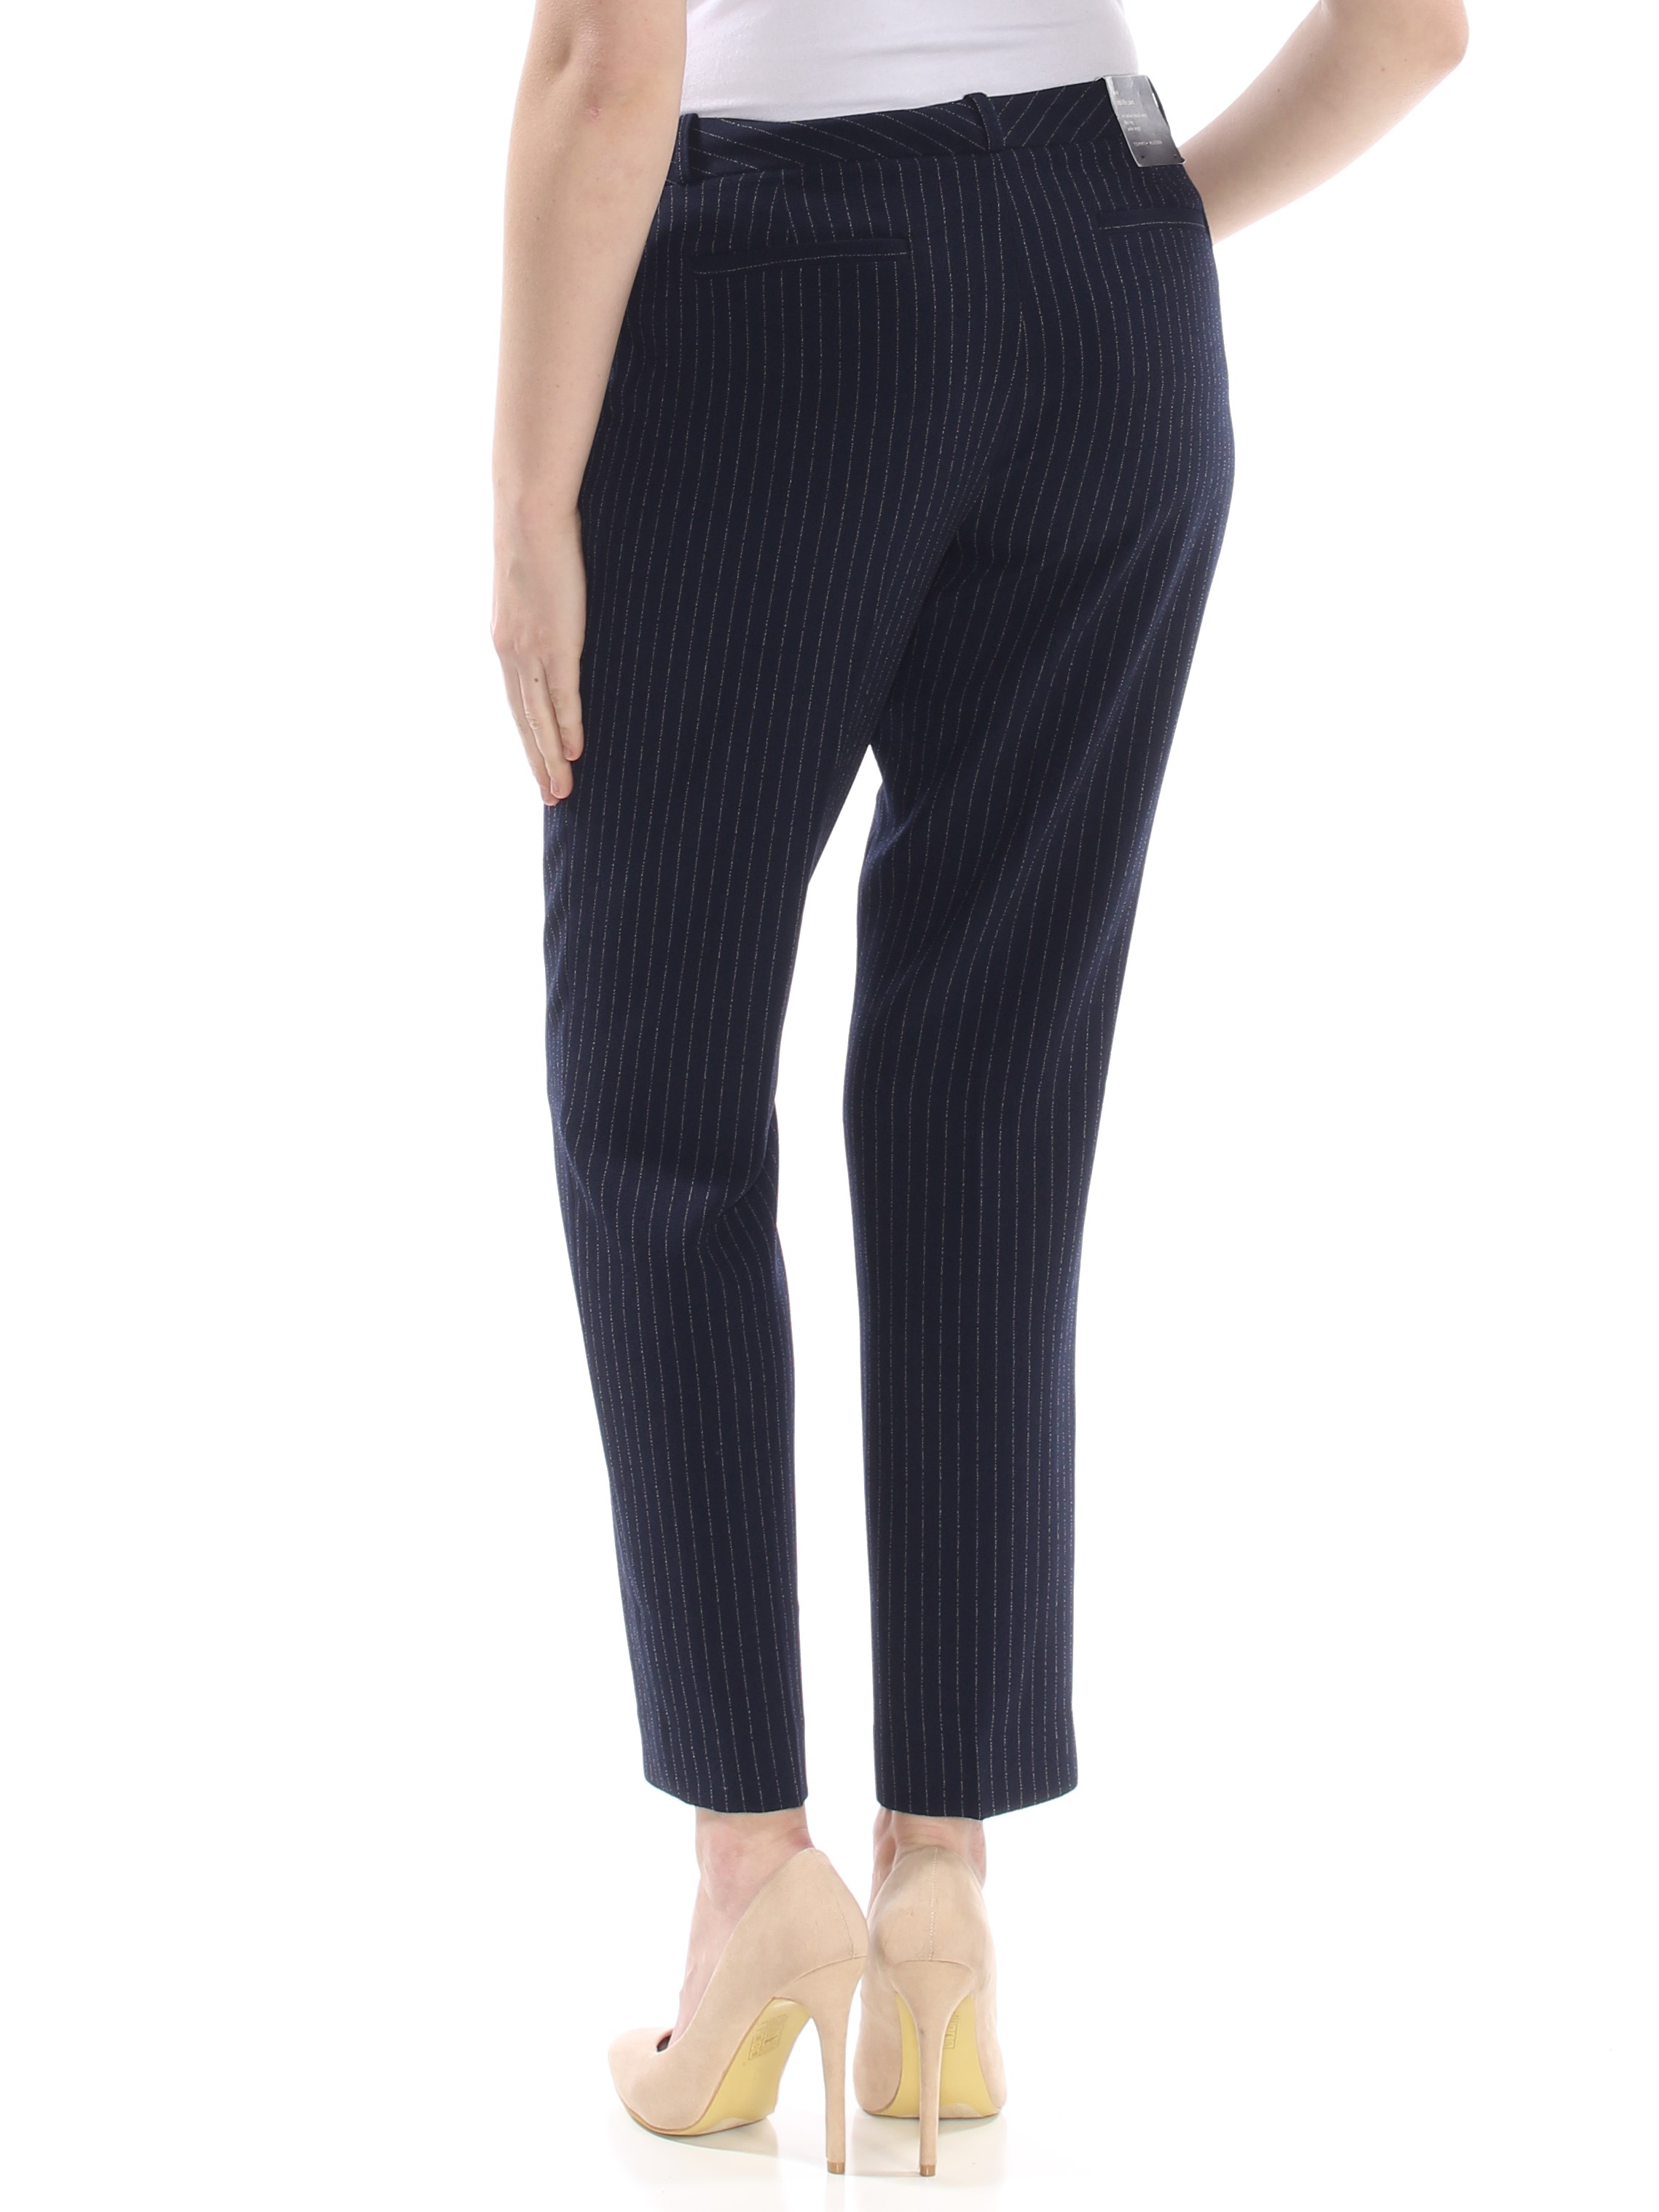 TOMMY HILFIGER $89 Womens New Navy Pinstripe Pocketed Hidden Closure Pants 8 B+B - image 2 of 2